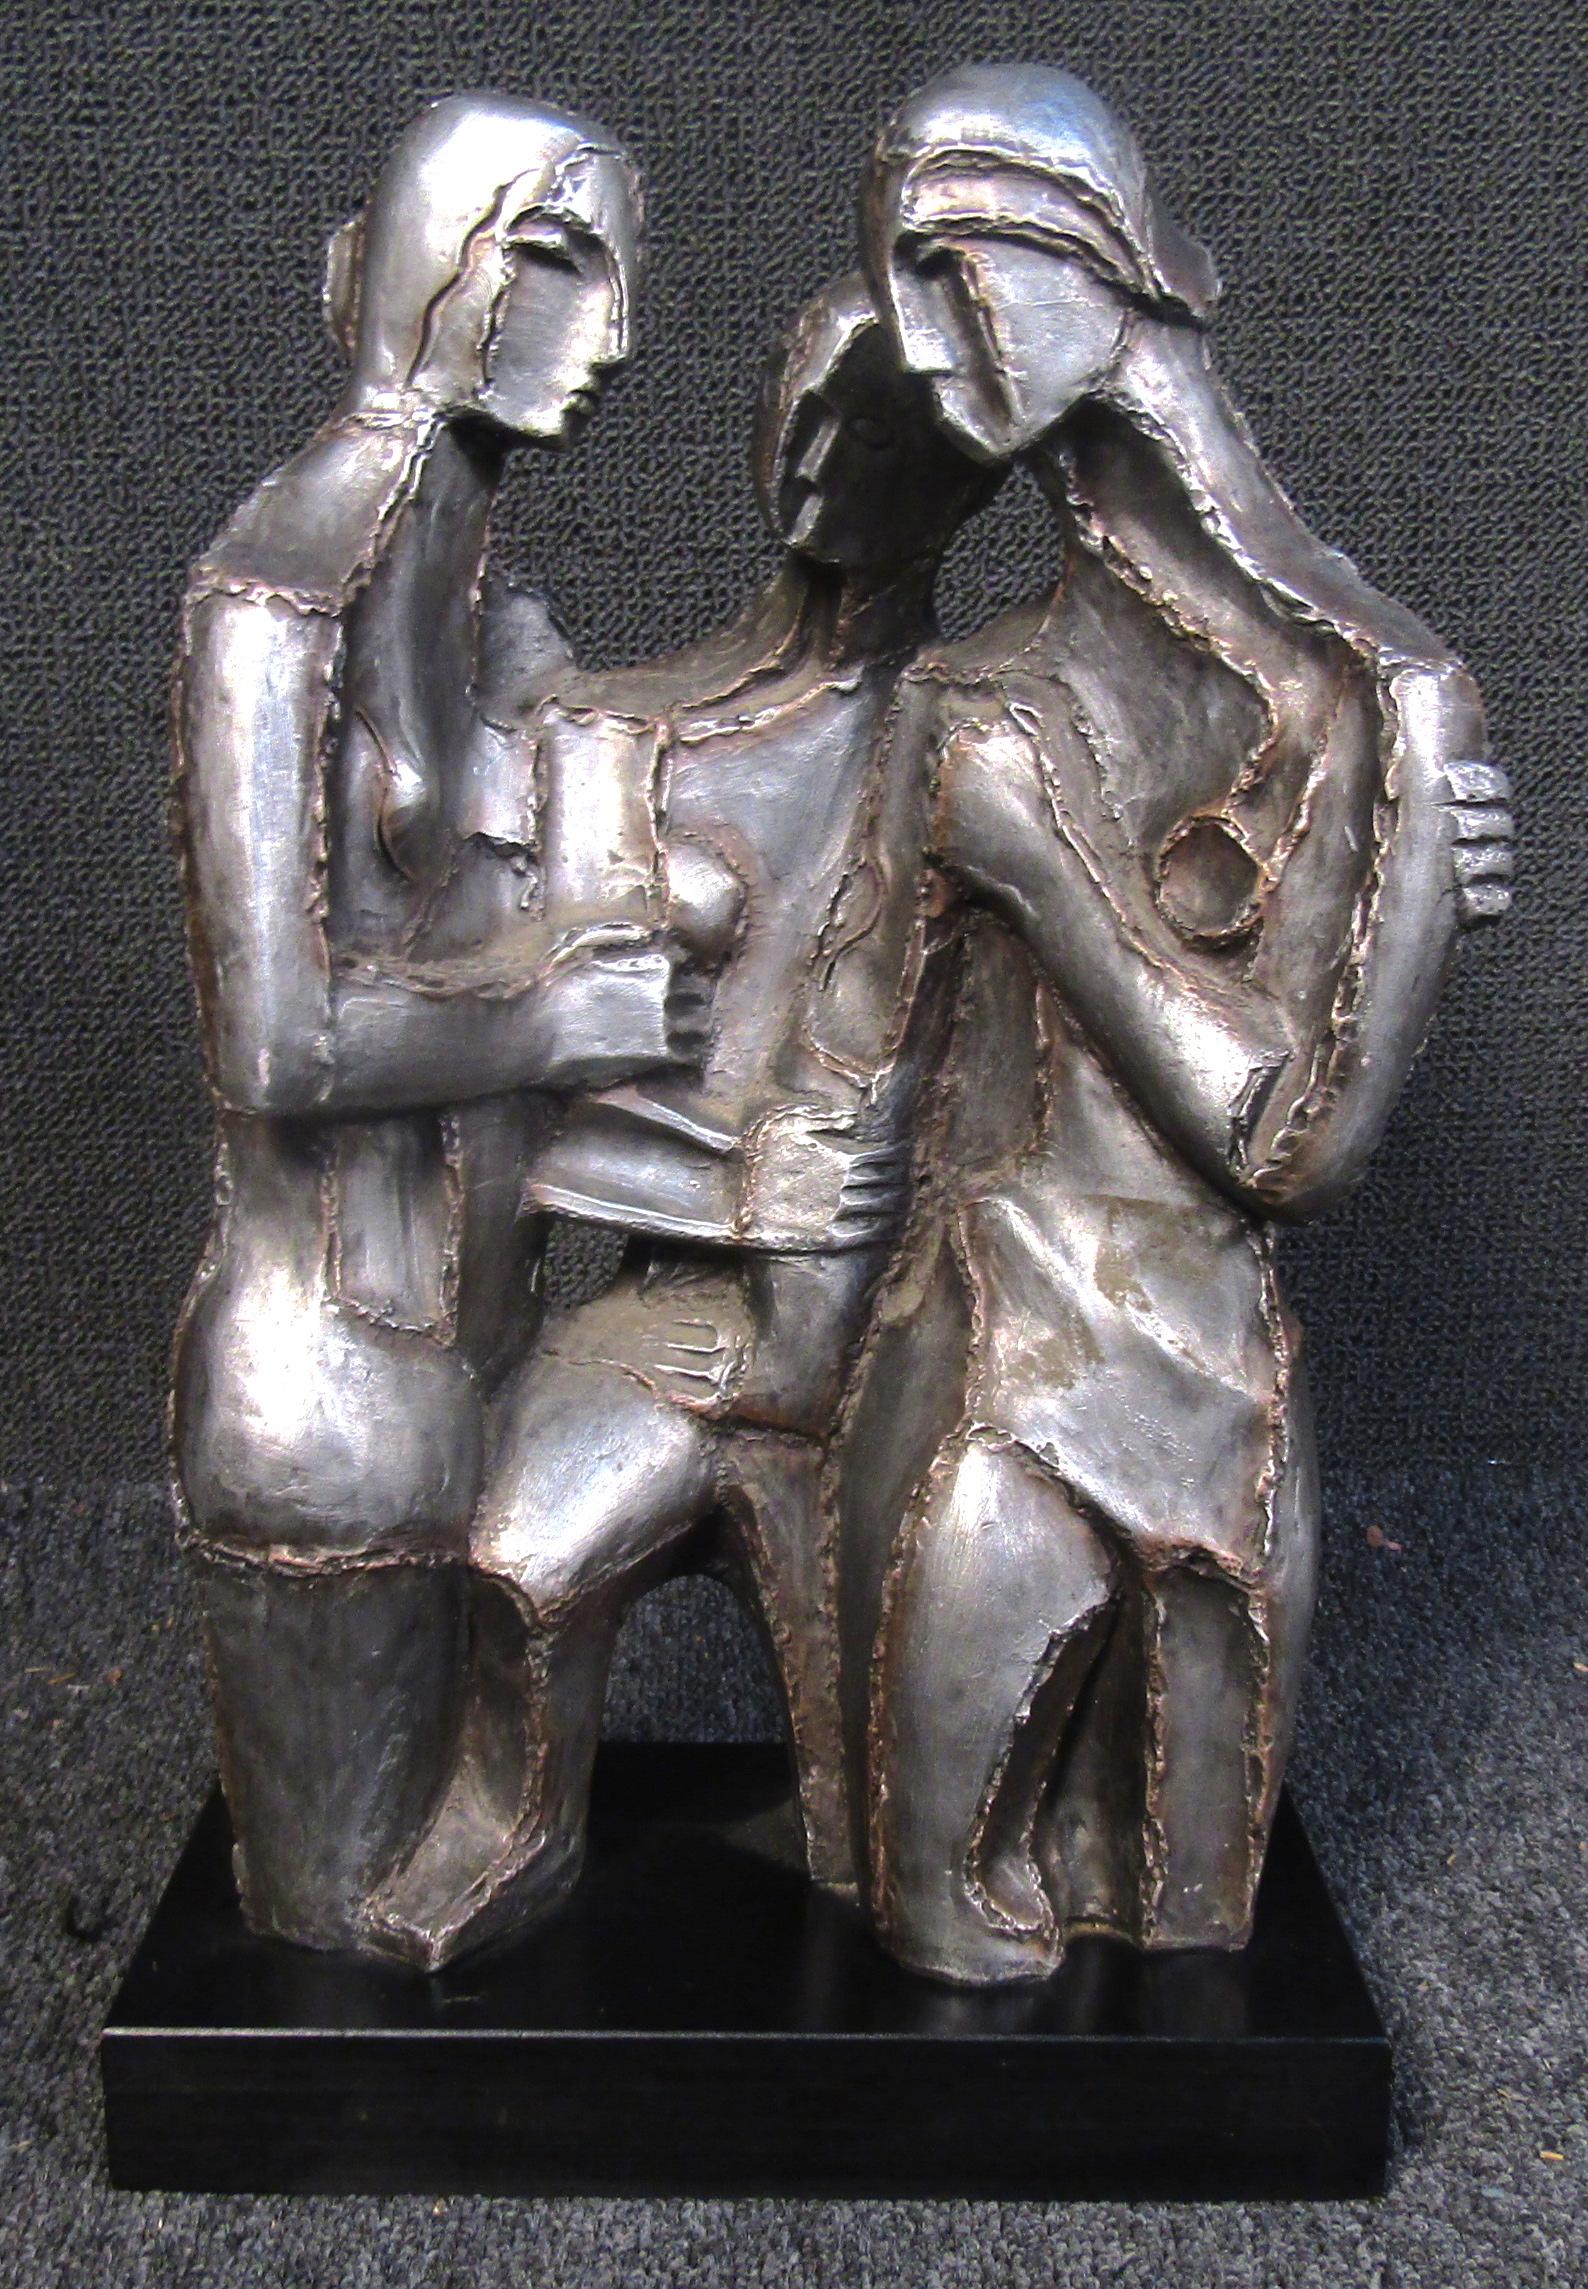 Beautiful one of a kind Picasso inspired ceramic sculpture of the Three Graces by Austin Productions. Stamped and dated 1968. This stunning and emotional sculpture features three nude women huddled together, the welded look, created in ceramic, is